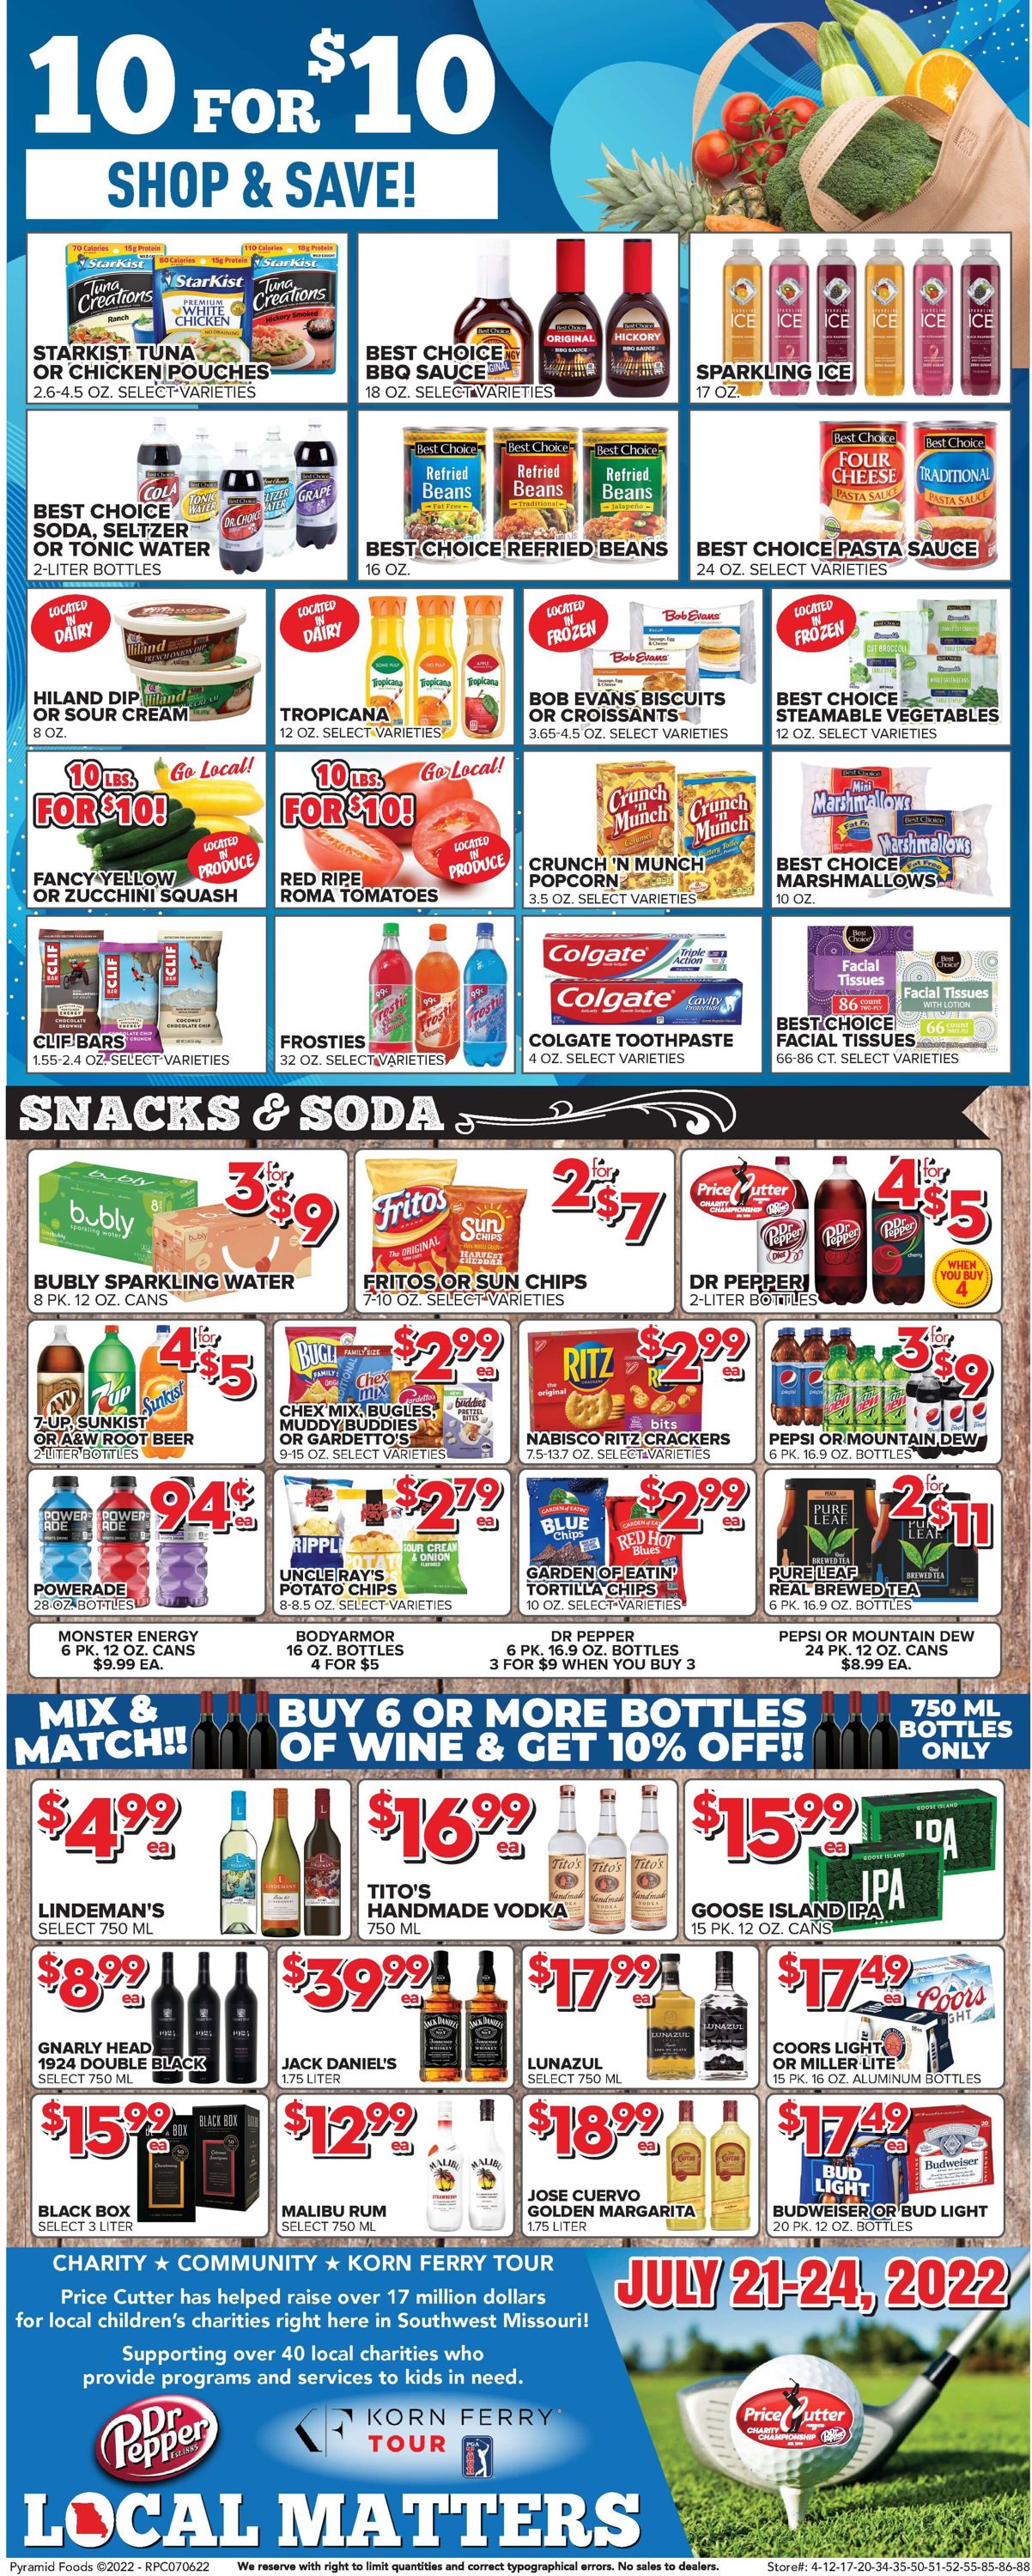 Price Cutter Weekly Ad Circular - valid 07/06-07/12/2022 (Page 6)